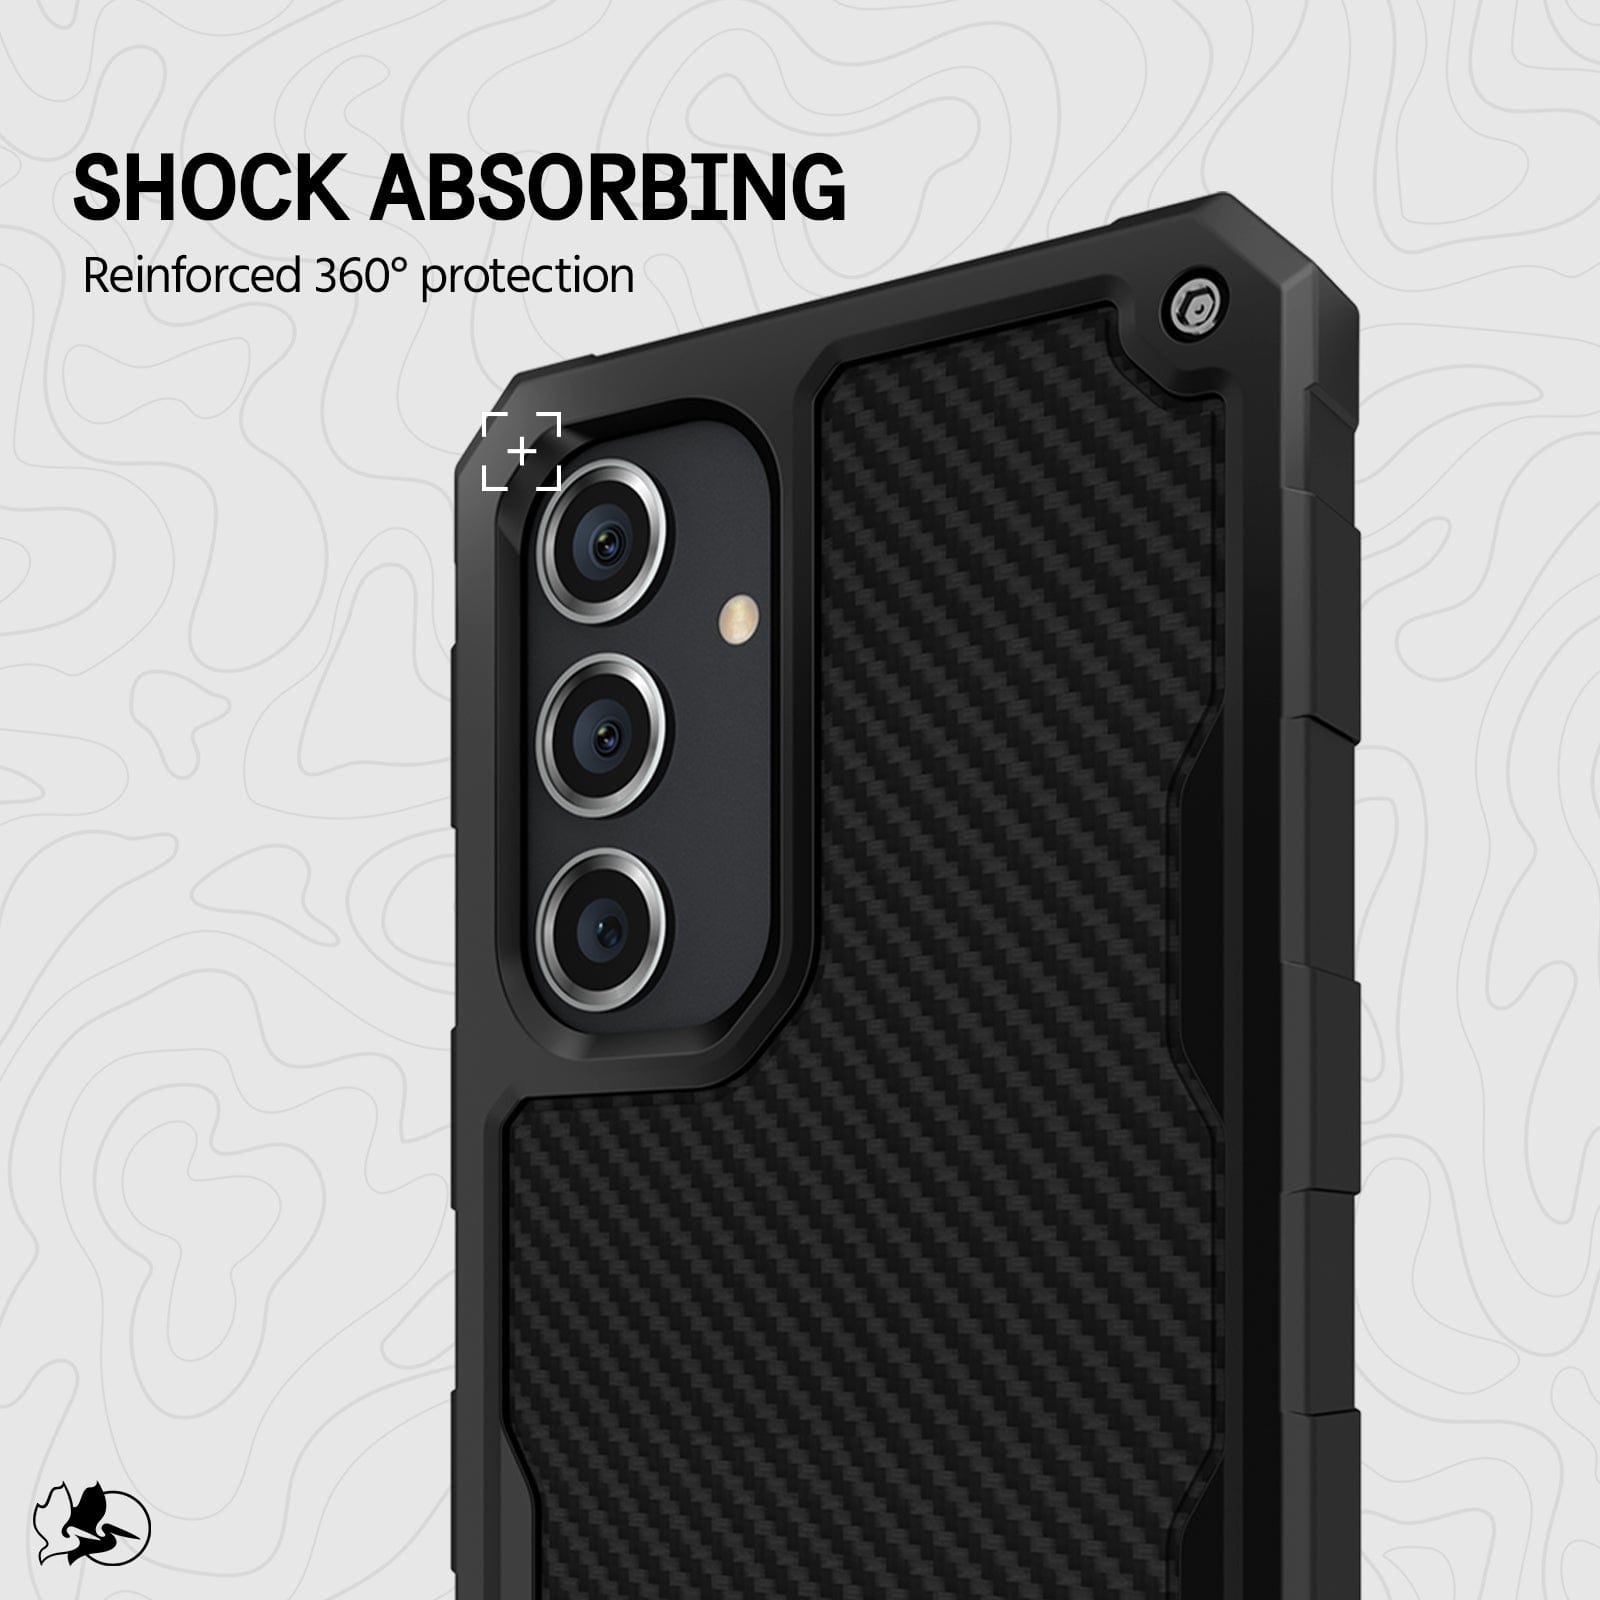 SHOCK ABSORBING REINFORCED 360 DEGREE PROTECTION